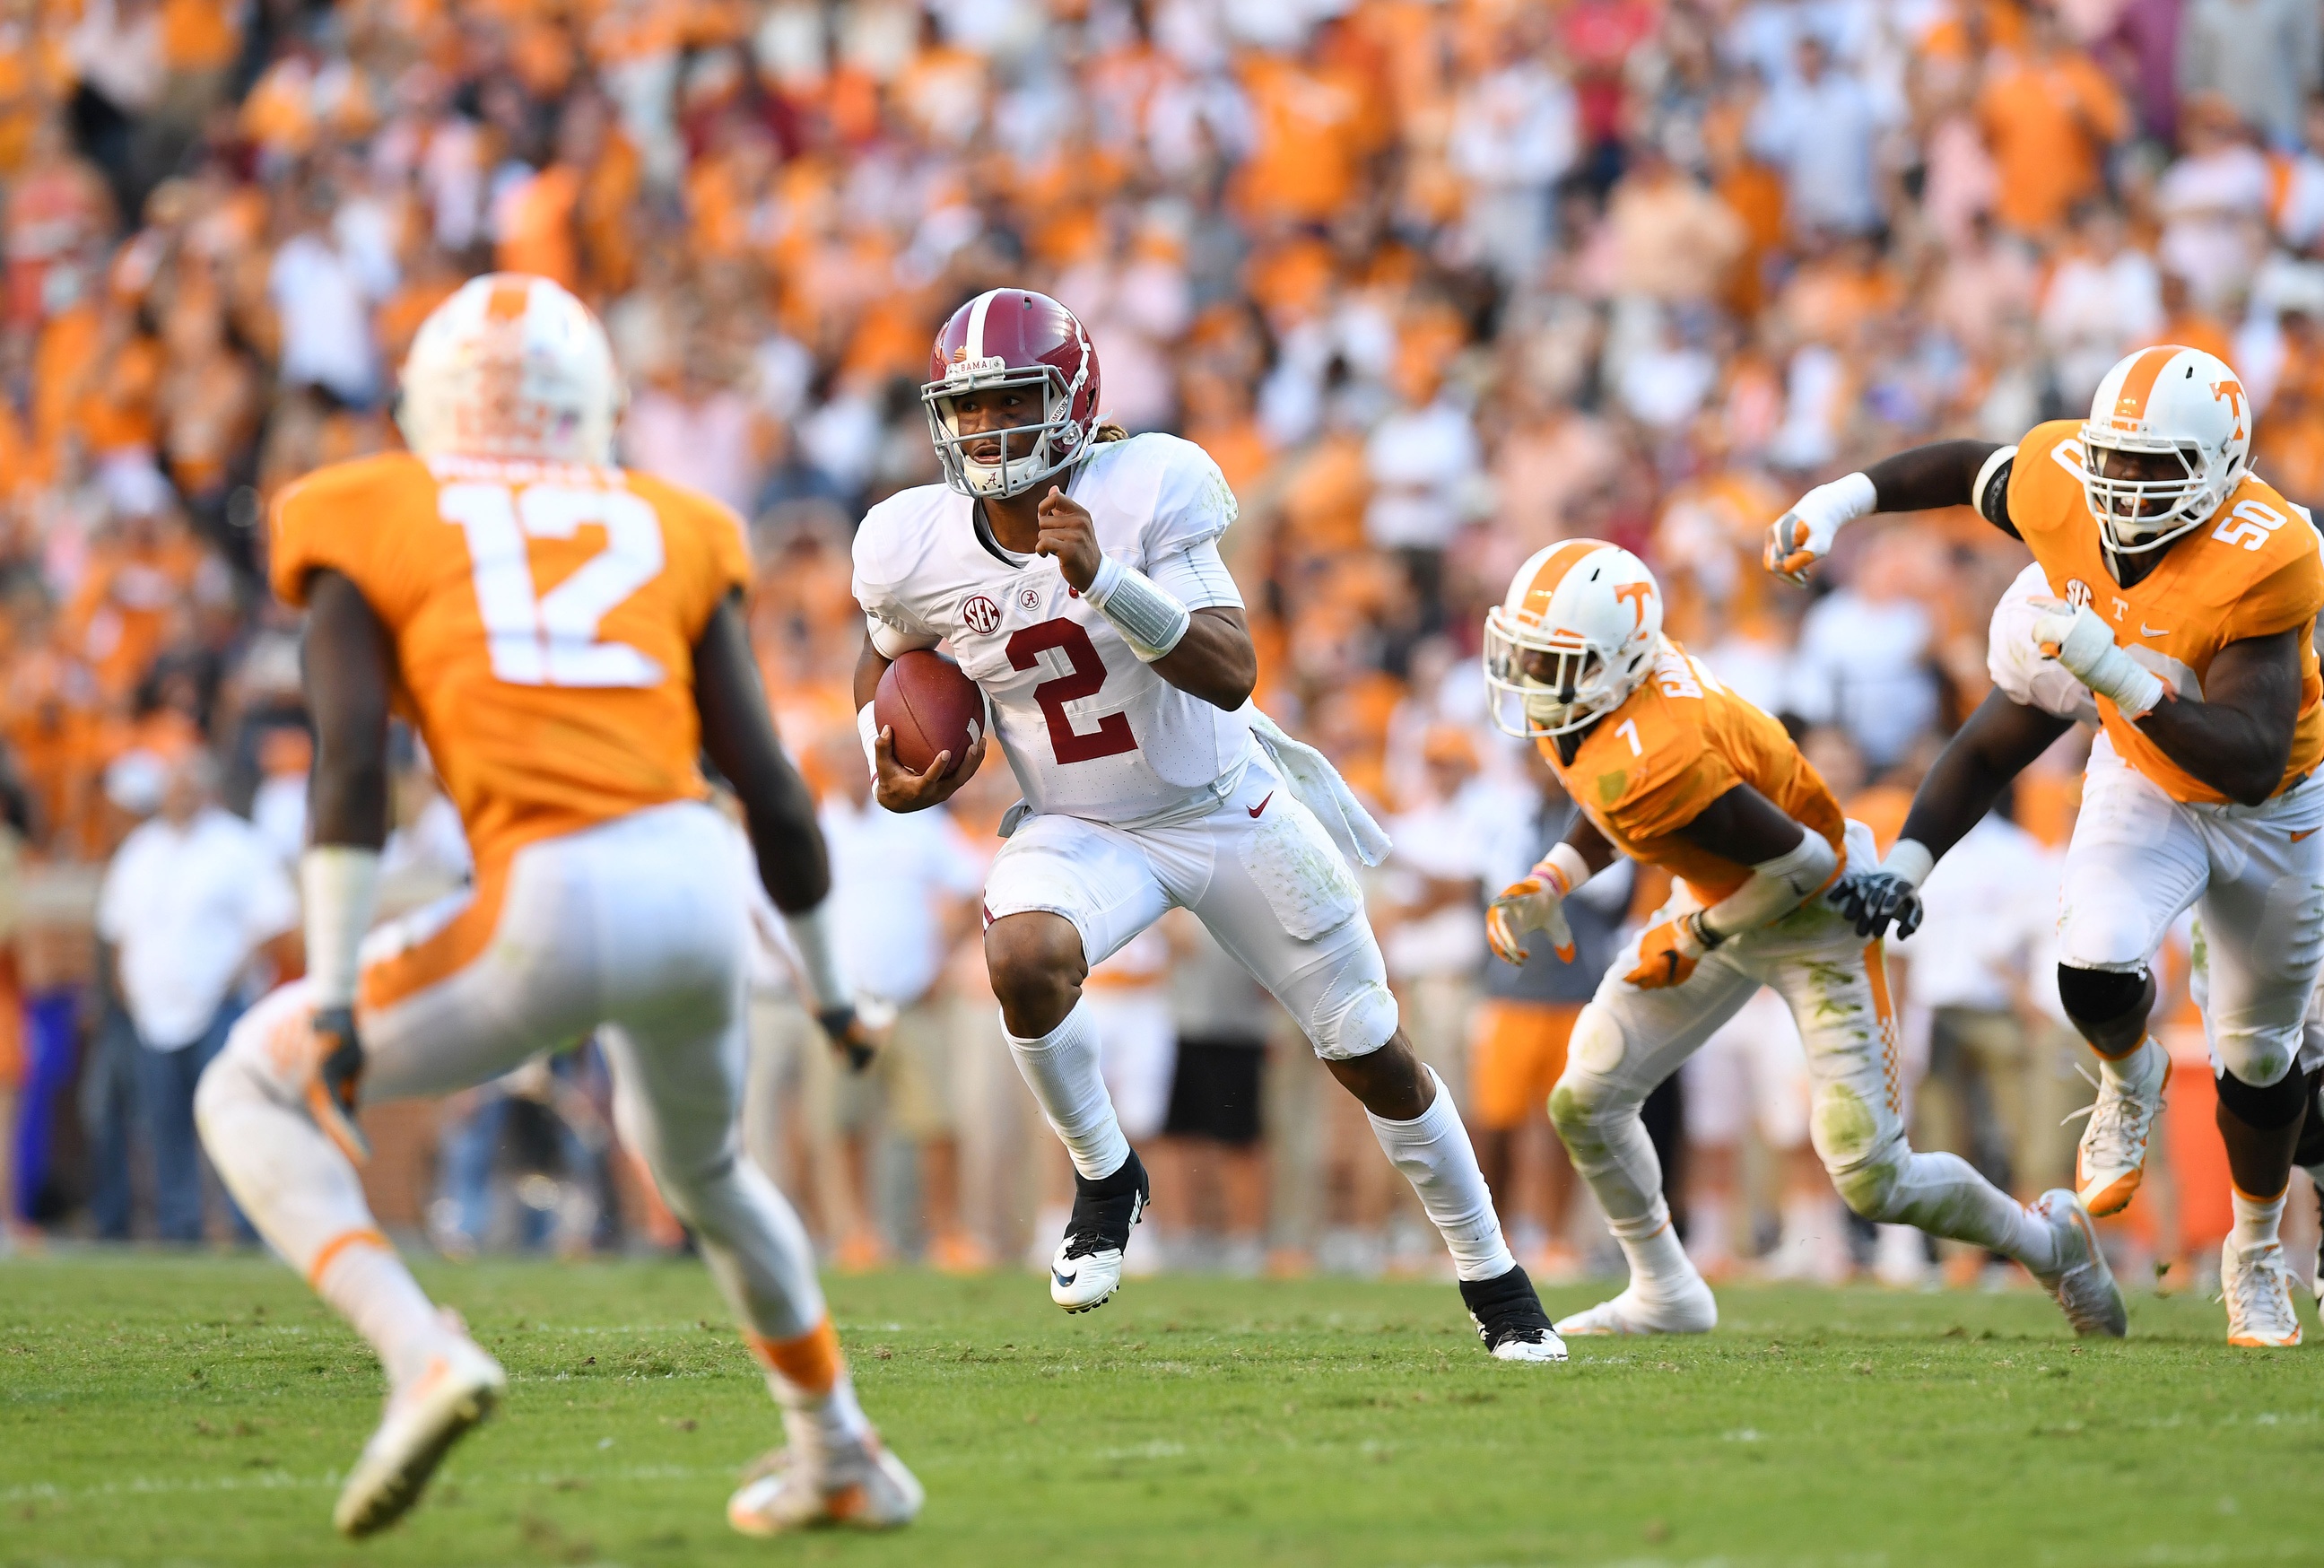 Oct 15, 2016; Knoxville, TN, USA; Alabama Crimson Tide quarterback Jalen Hurts (2) carries the ball against the Tennessee Volunteers during the third quarter at Neyland Stadium. Mandatory Credit: John David Mercer-USA TODAY Sports